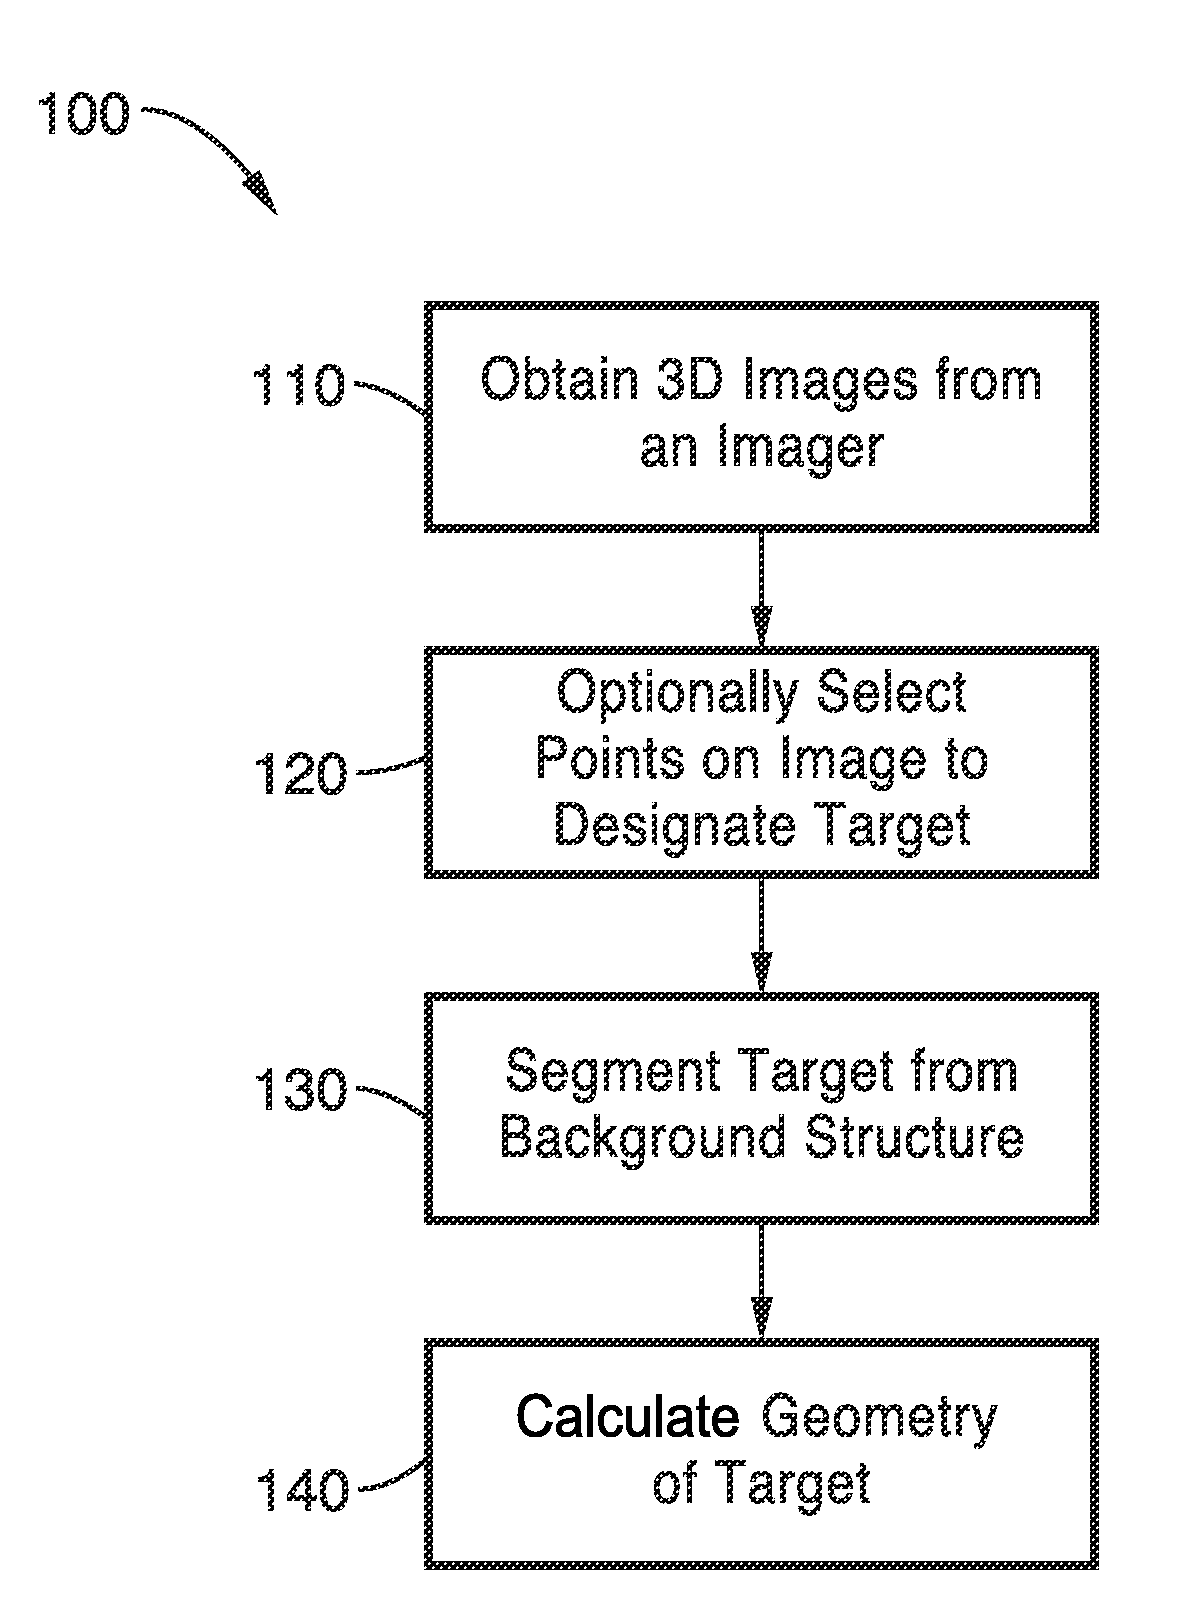 Apparatus and method for surface capturing and volumetric analysis of multidimensional images